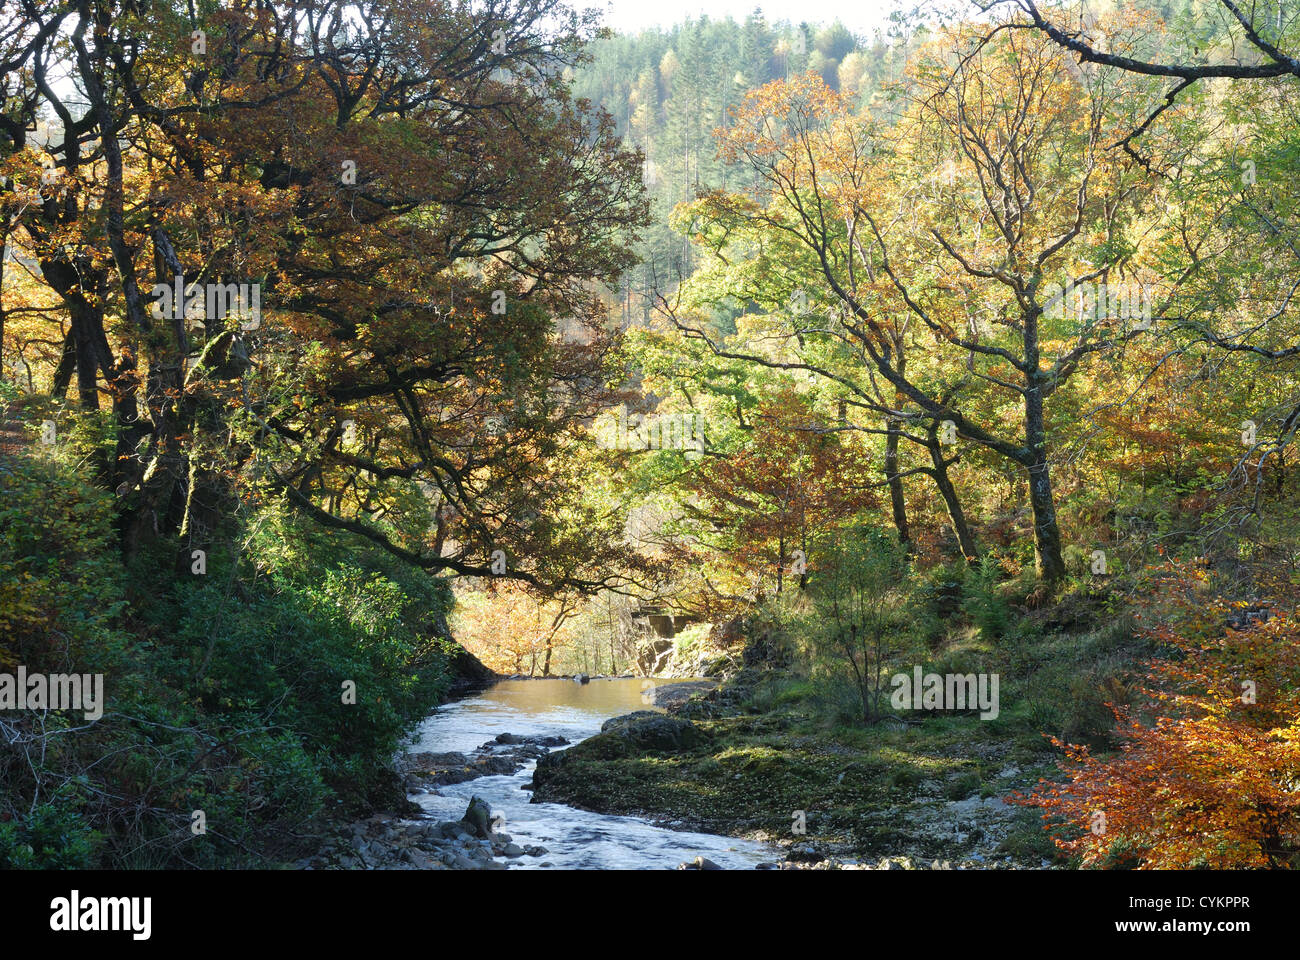 River Mawddach in autumn, Snowdonia National Park, Wales, UK Stock Photo